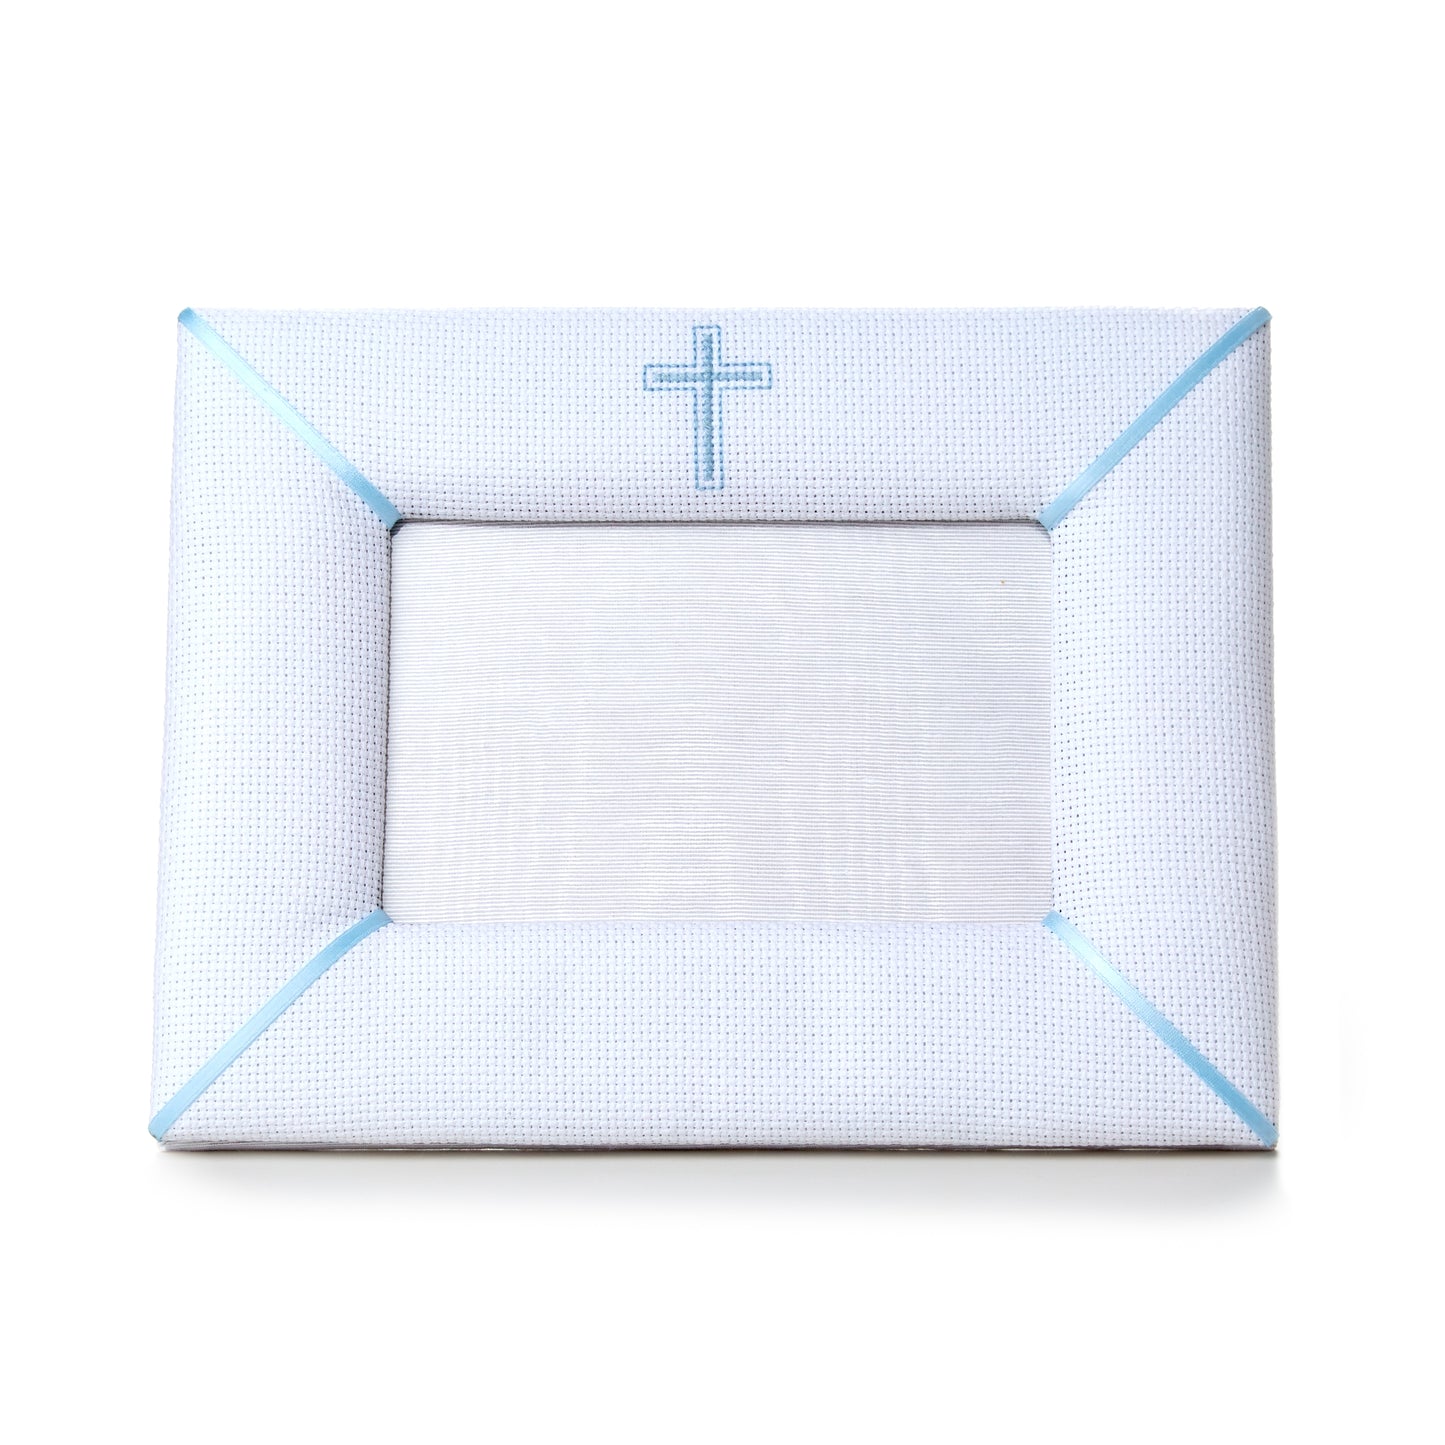 Embroidered Frame, Cross